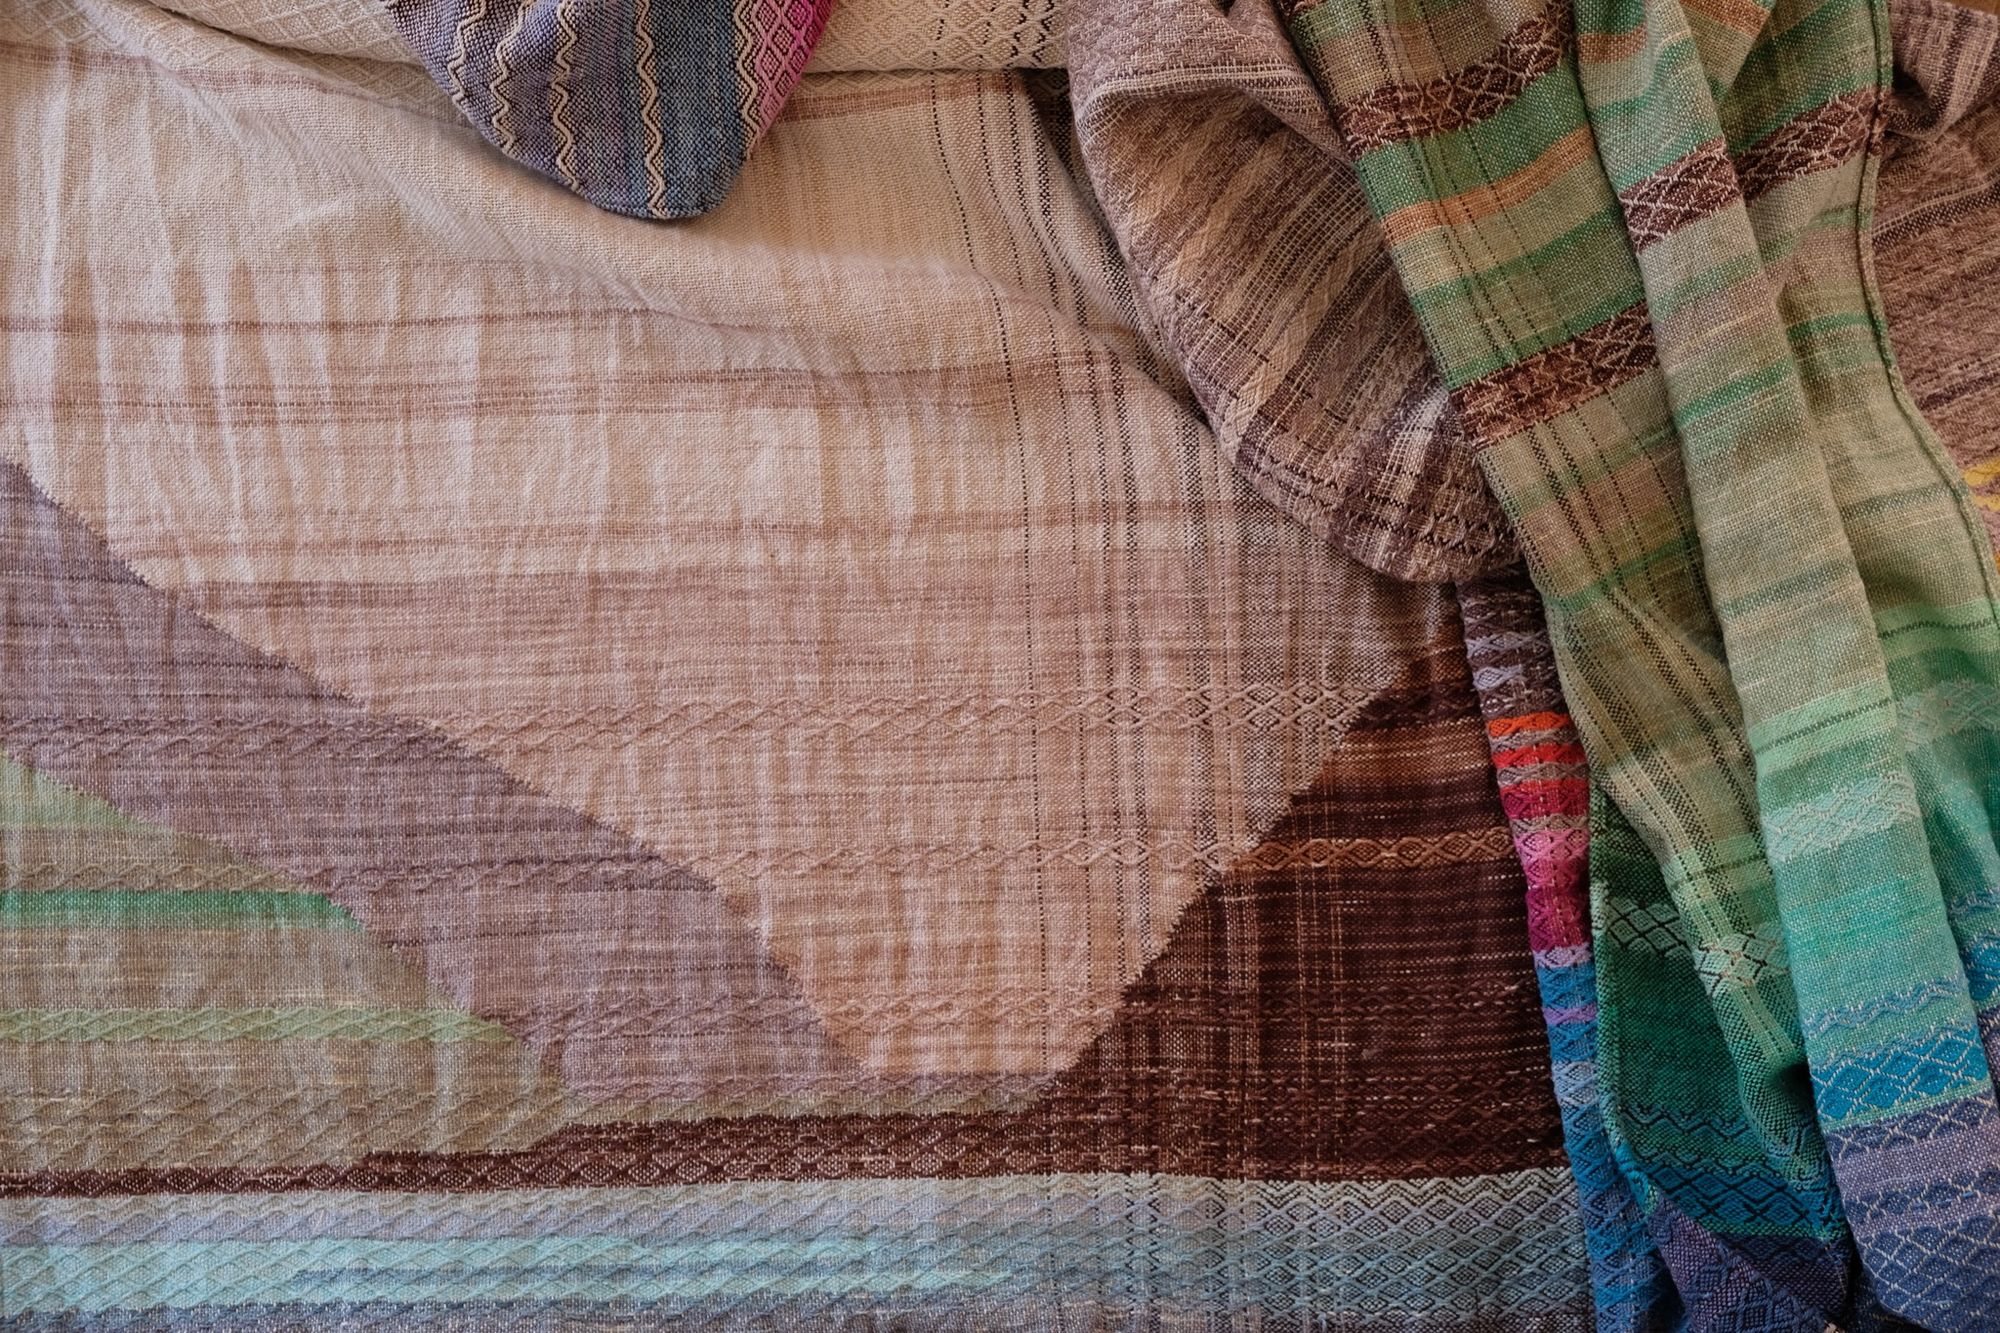 Handwoven raw silk fabric with textures diamond weave in browns, tans, purples, blues, yellows, pink and orange